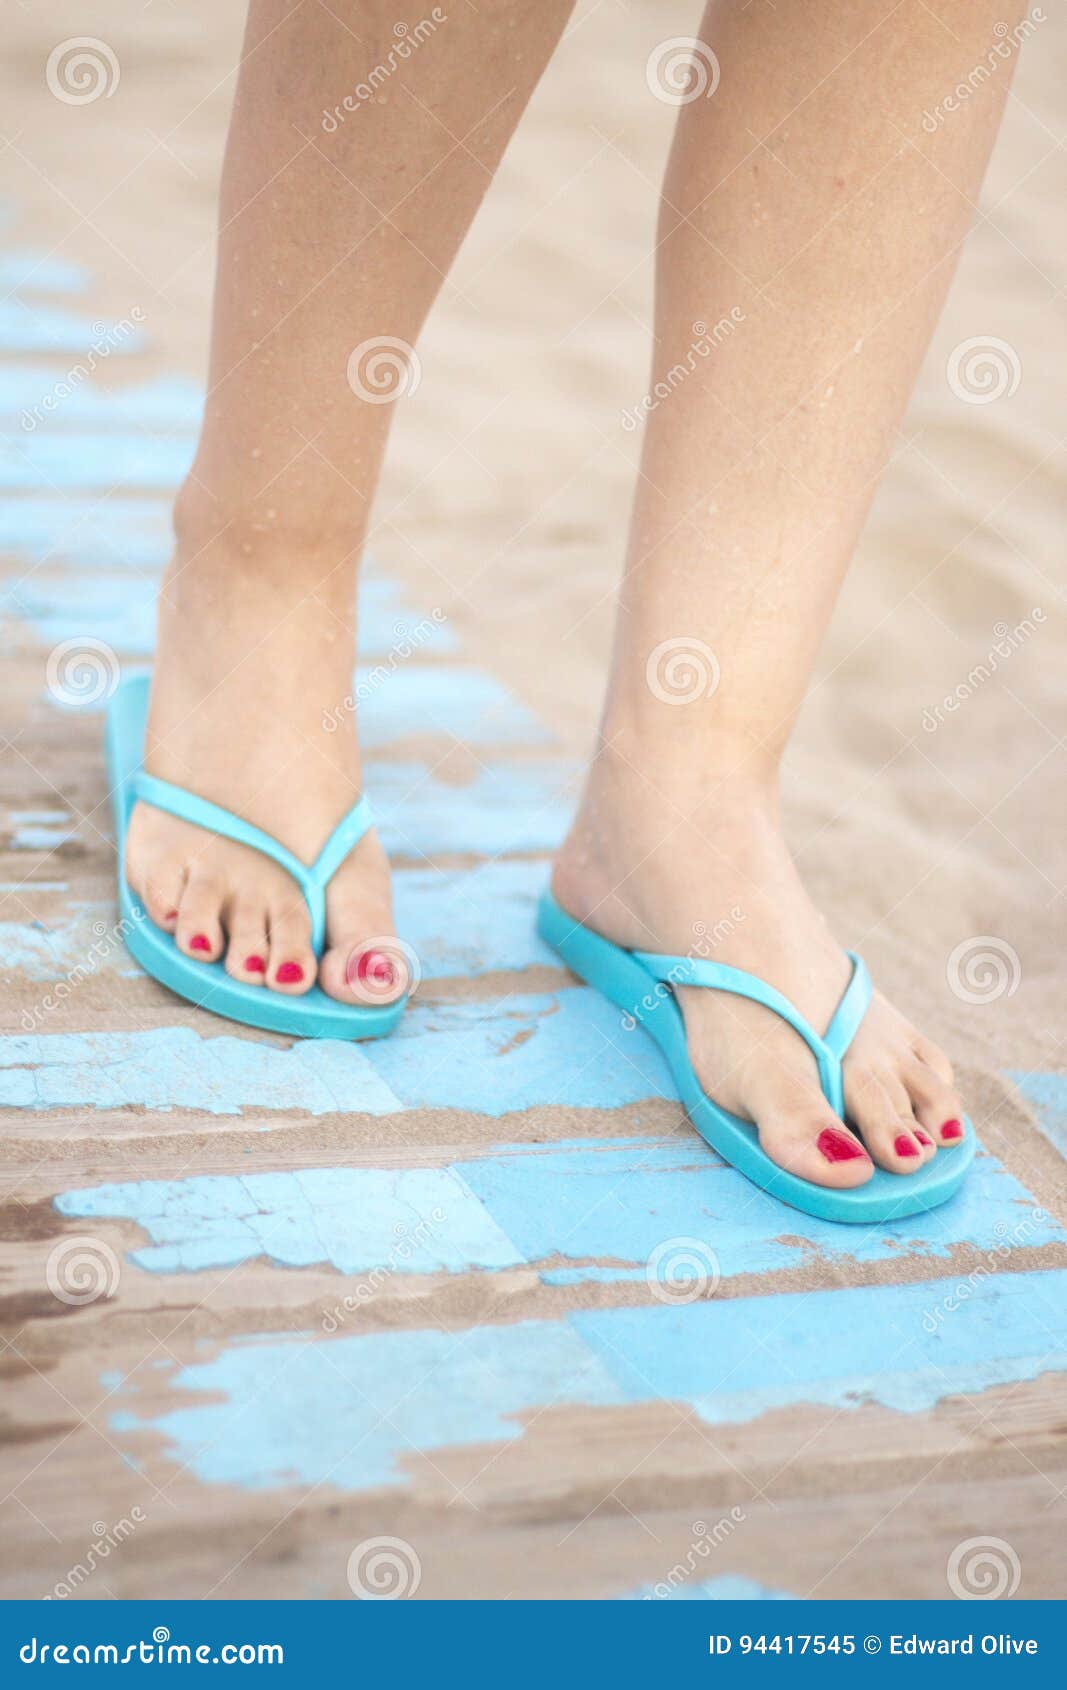 Lady& X27;s Feet in Sandals on Beach Stock Image - Image of flipflops ...